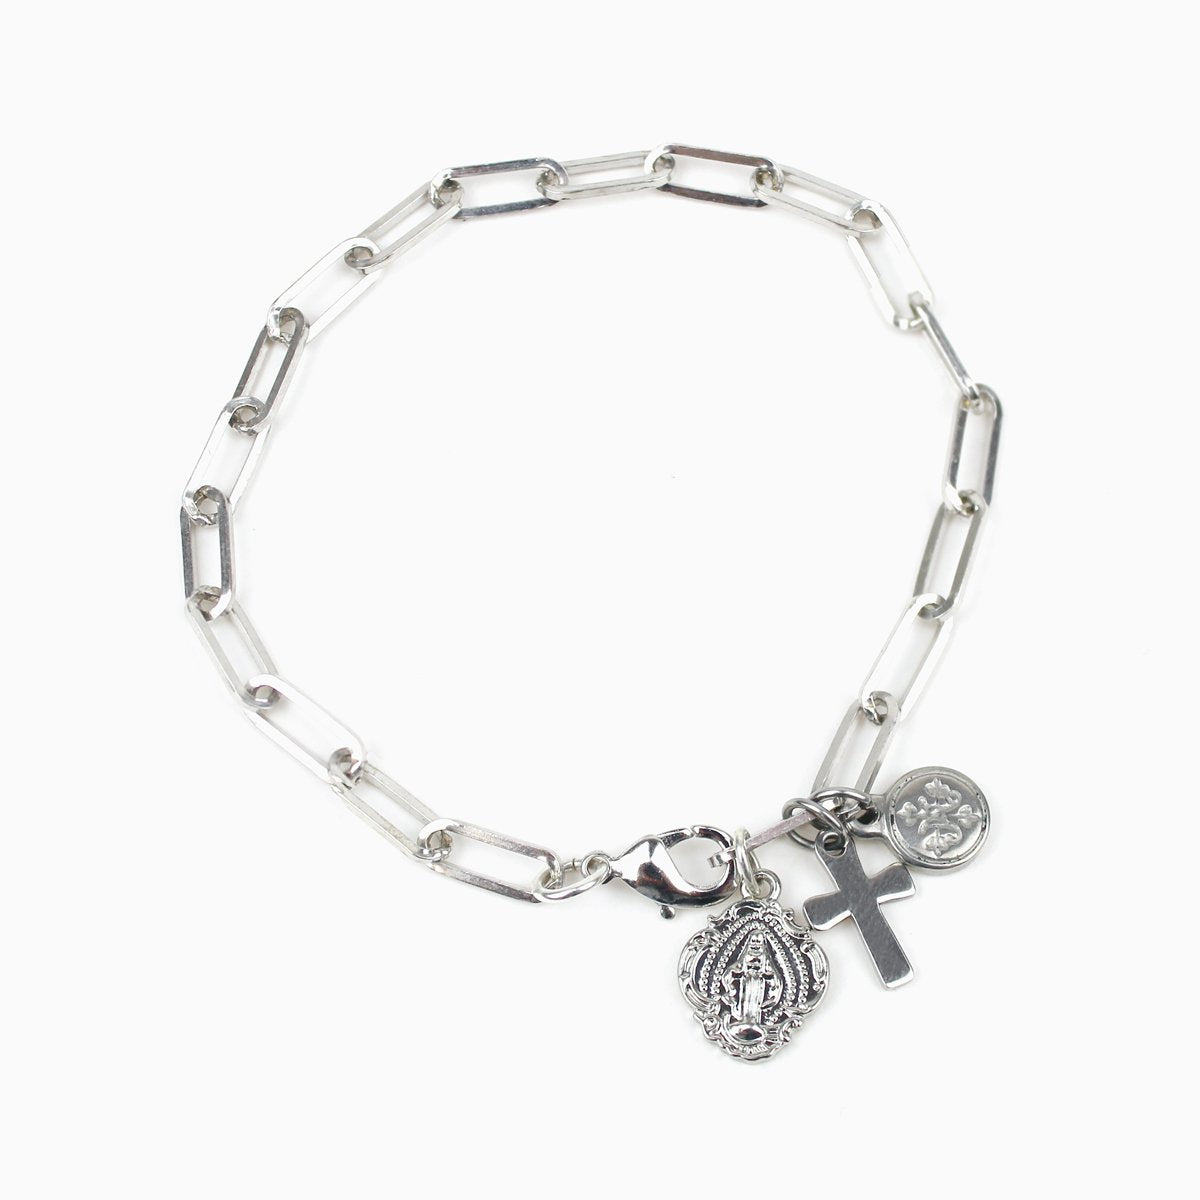 Iron-based Stainless Steel Link Consecration Bracelet with Miraculous Medal and Silver Tone Cross